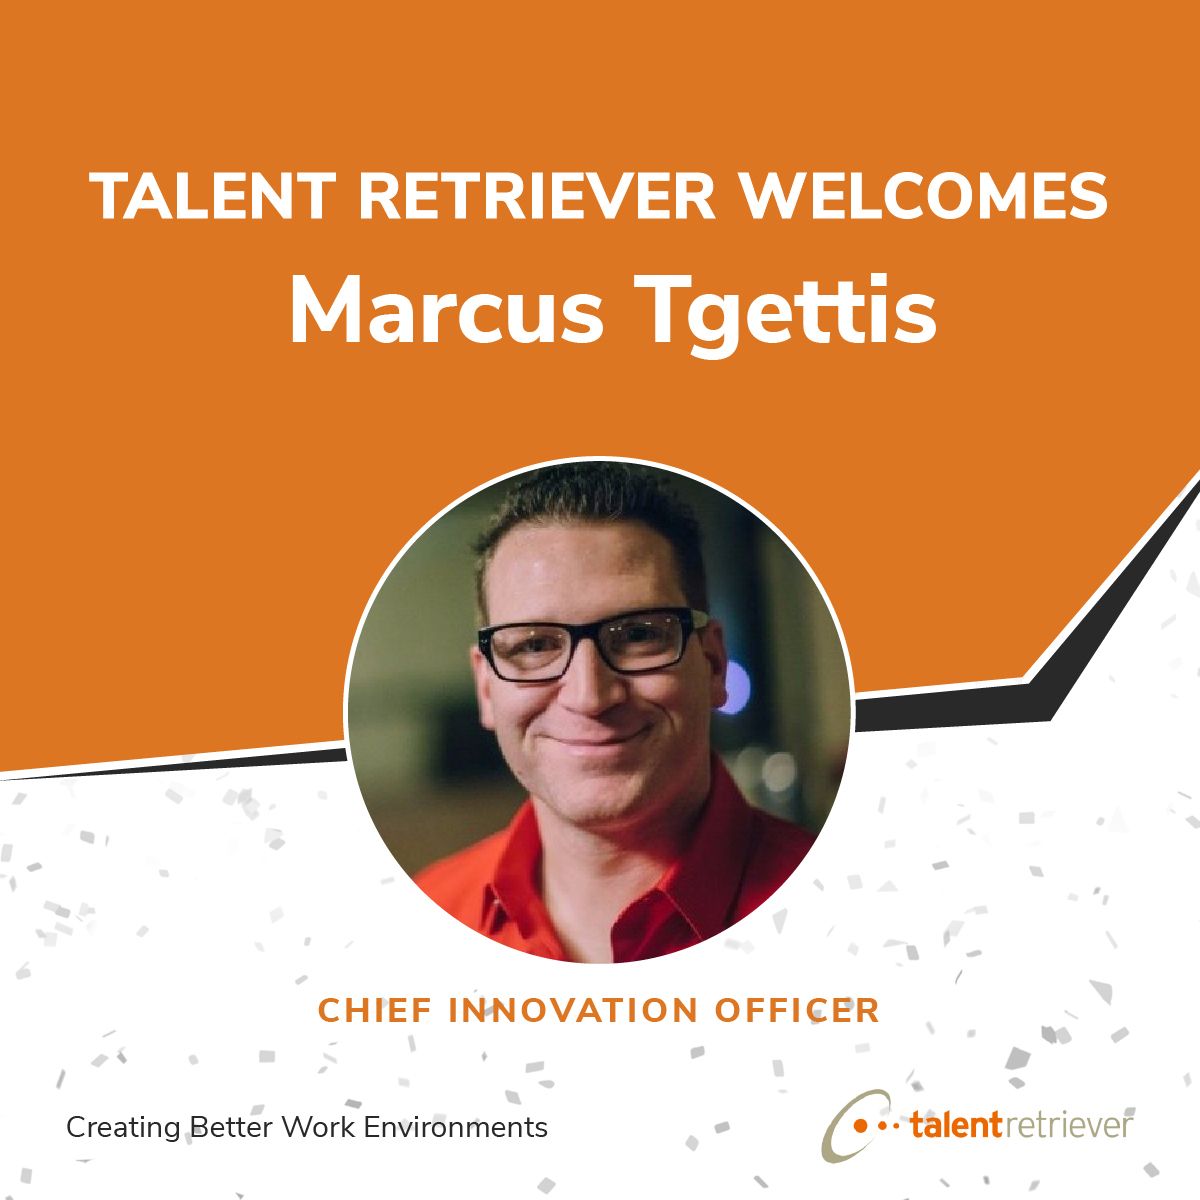 Talent Retriever Welcomes Marcus Tgettis as Chief Innovation Officer!